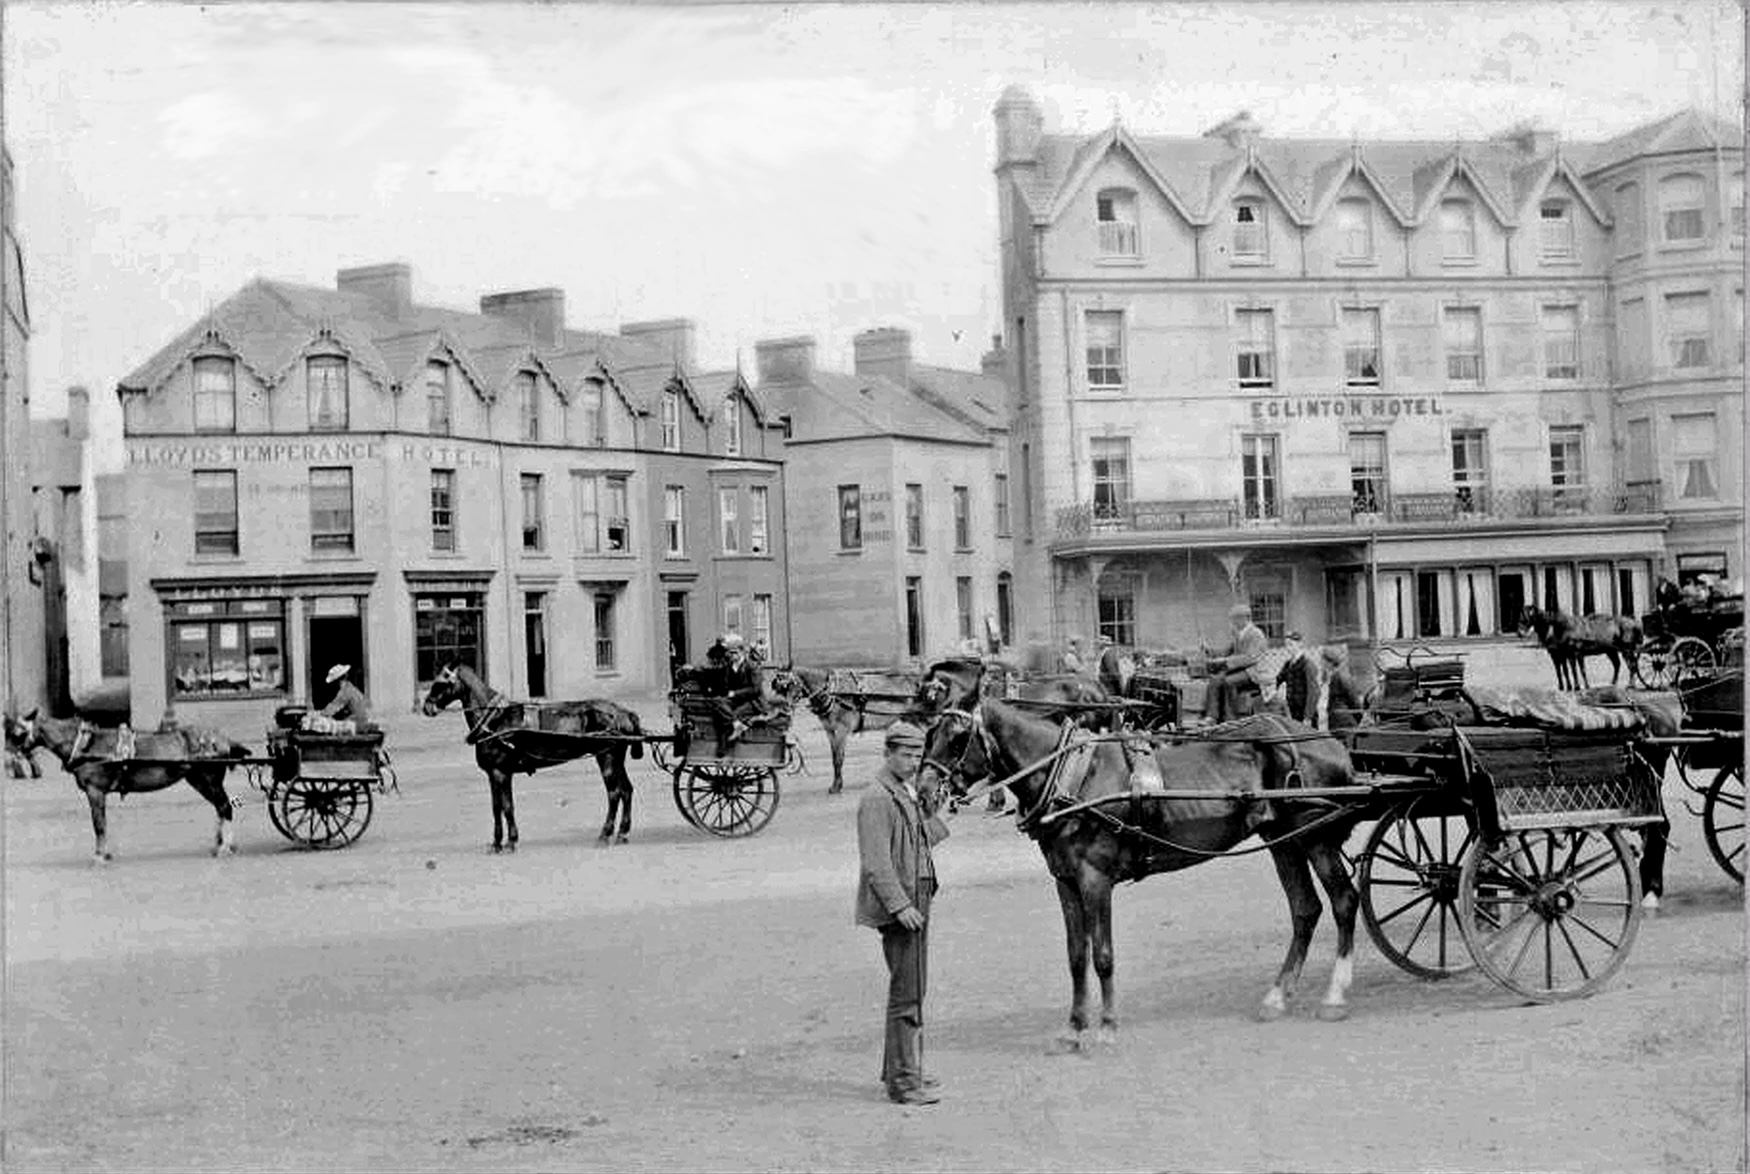  Jaunting Cars in Station Square